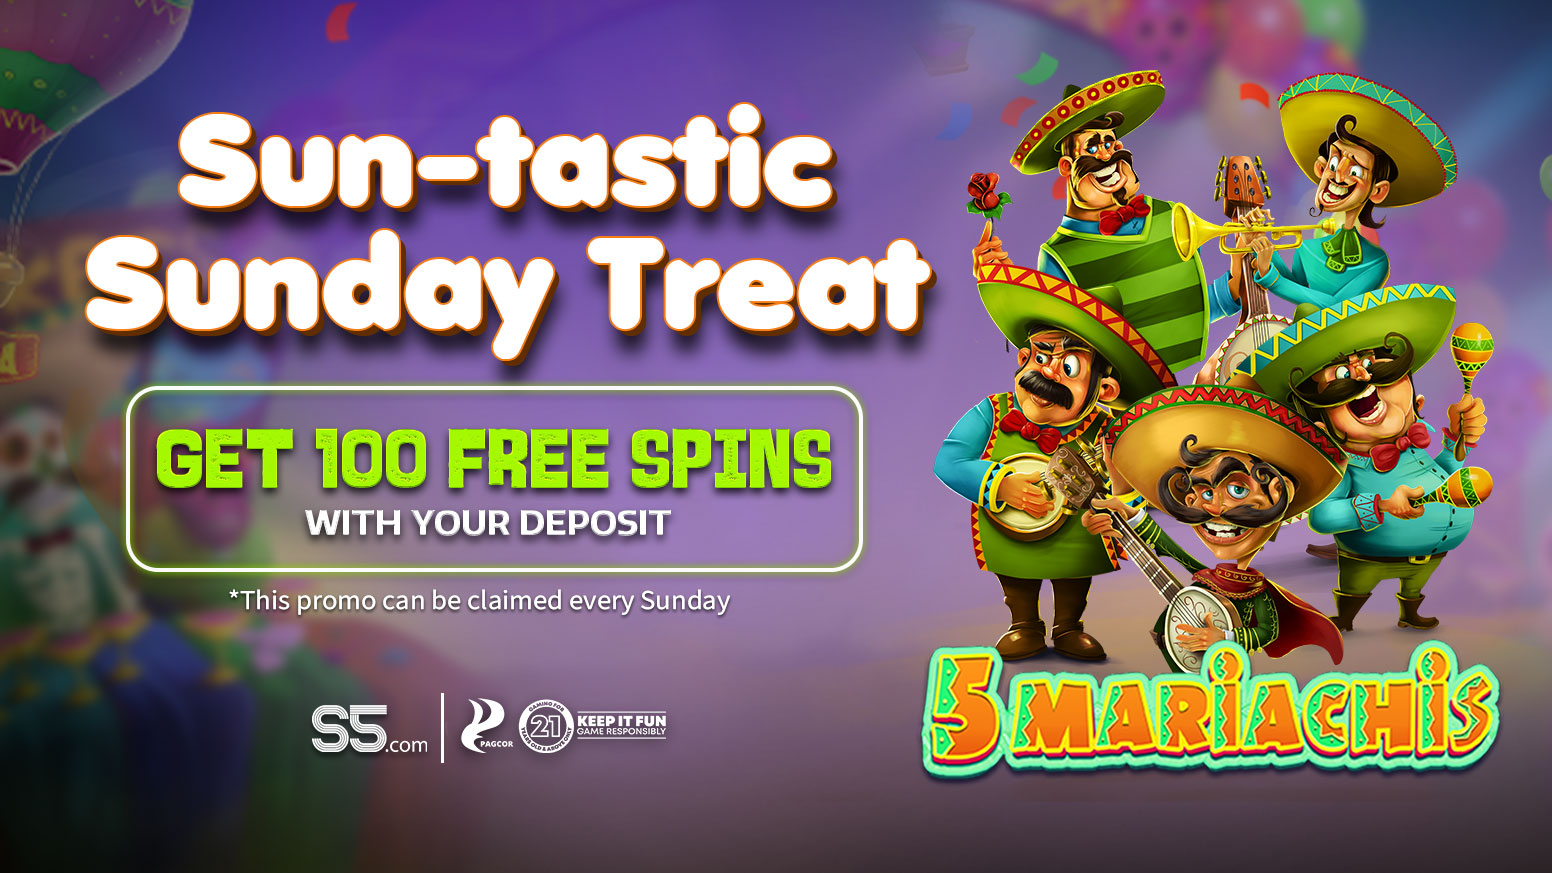 Sun-tastic Sunday Treat: 100 FREE Spins Exclusively For You 